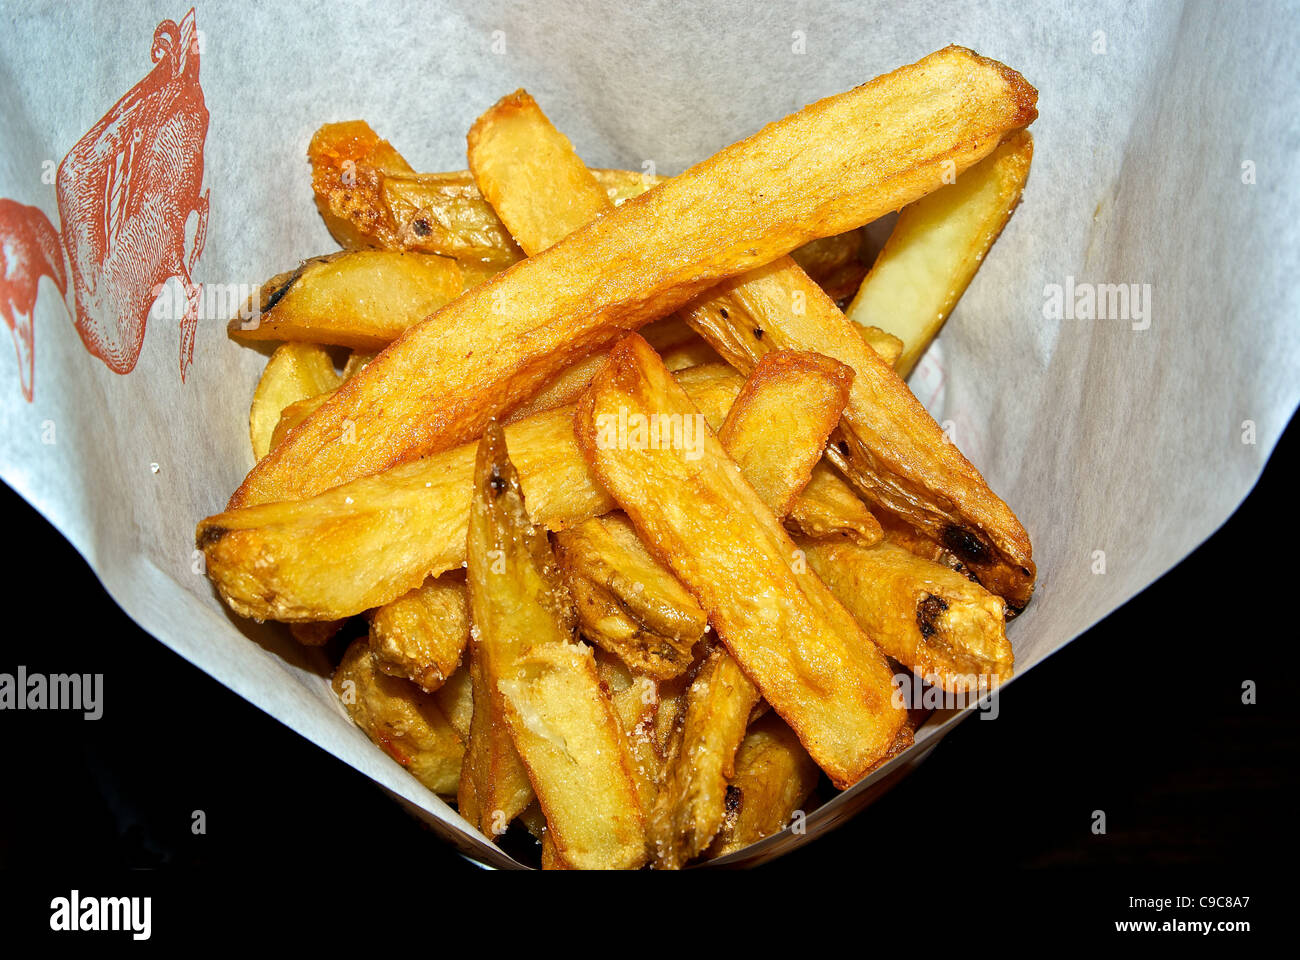 Pommes frites potato French fries fried in duck fat salted served in a paper cone Stock Photo